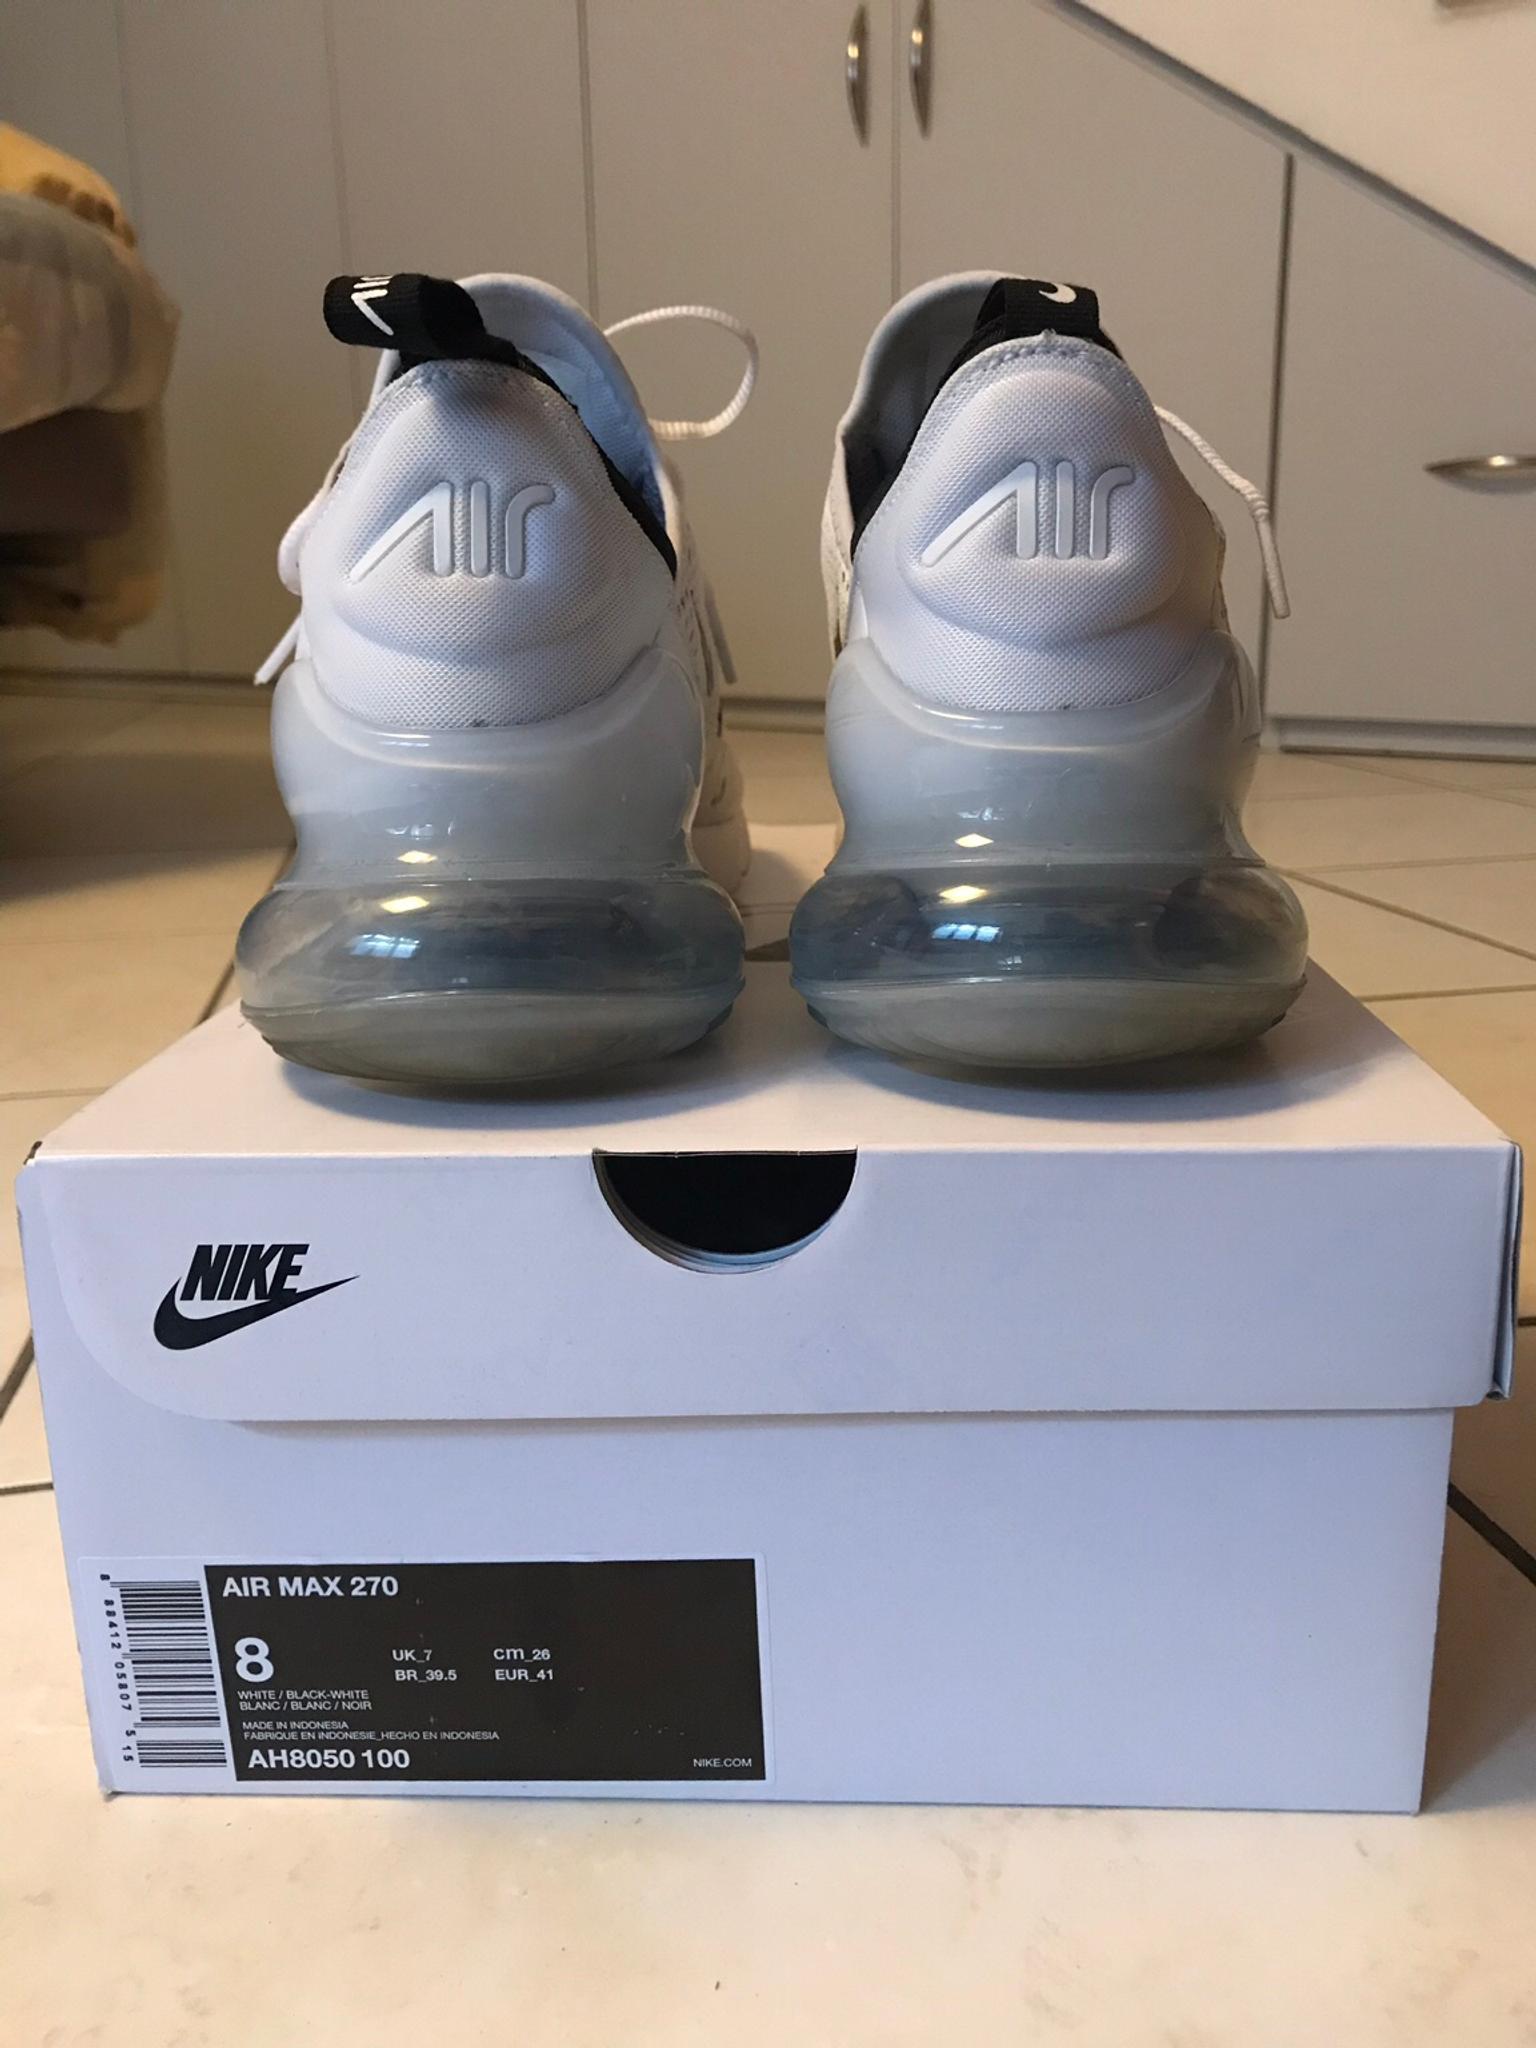 Nike air max 270 white in 24021 Albino for €55.00 for sale | Shpock